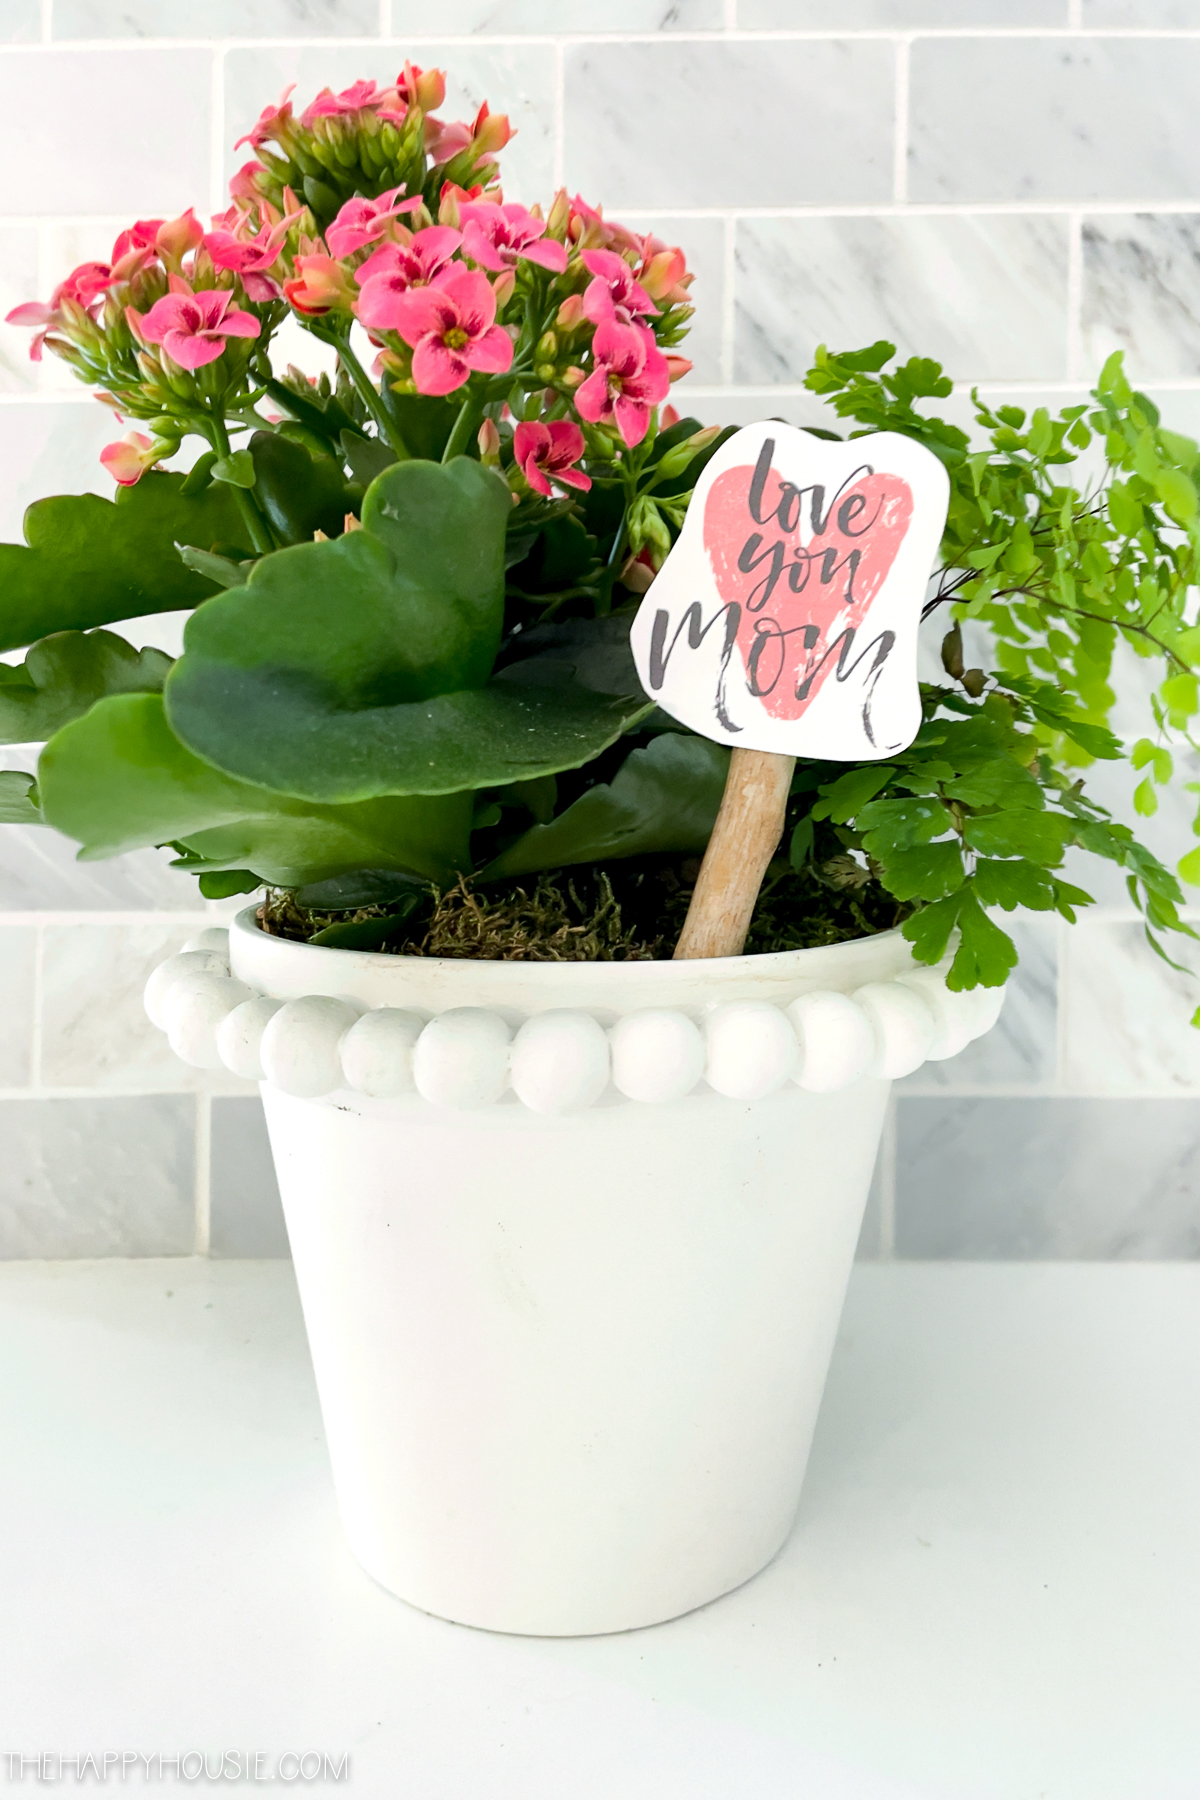 The finished potted flowers with the Love you mom sign.